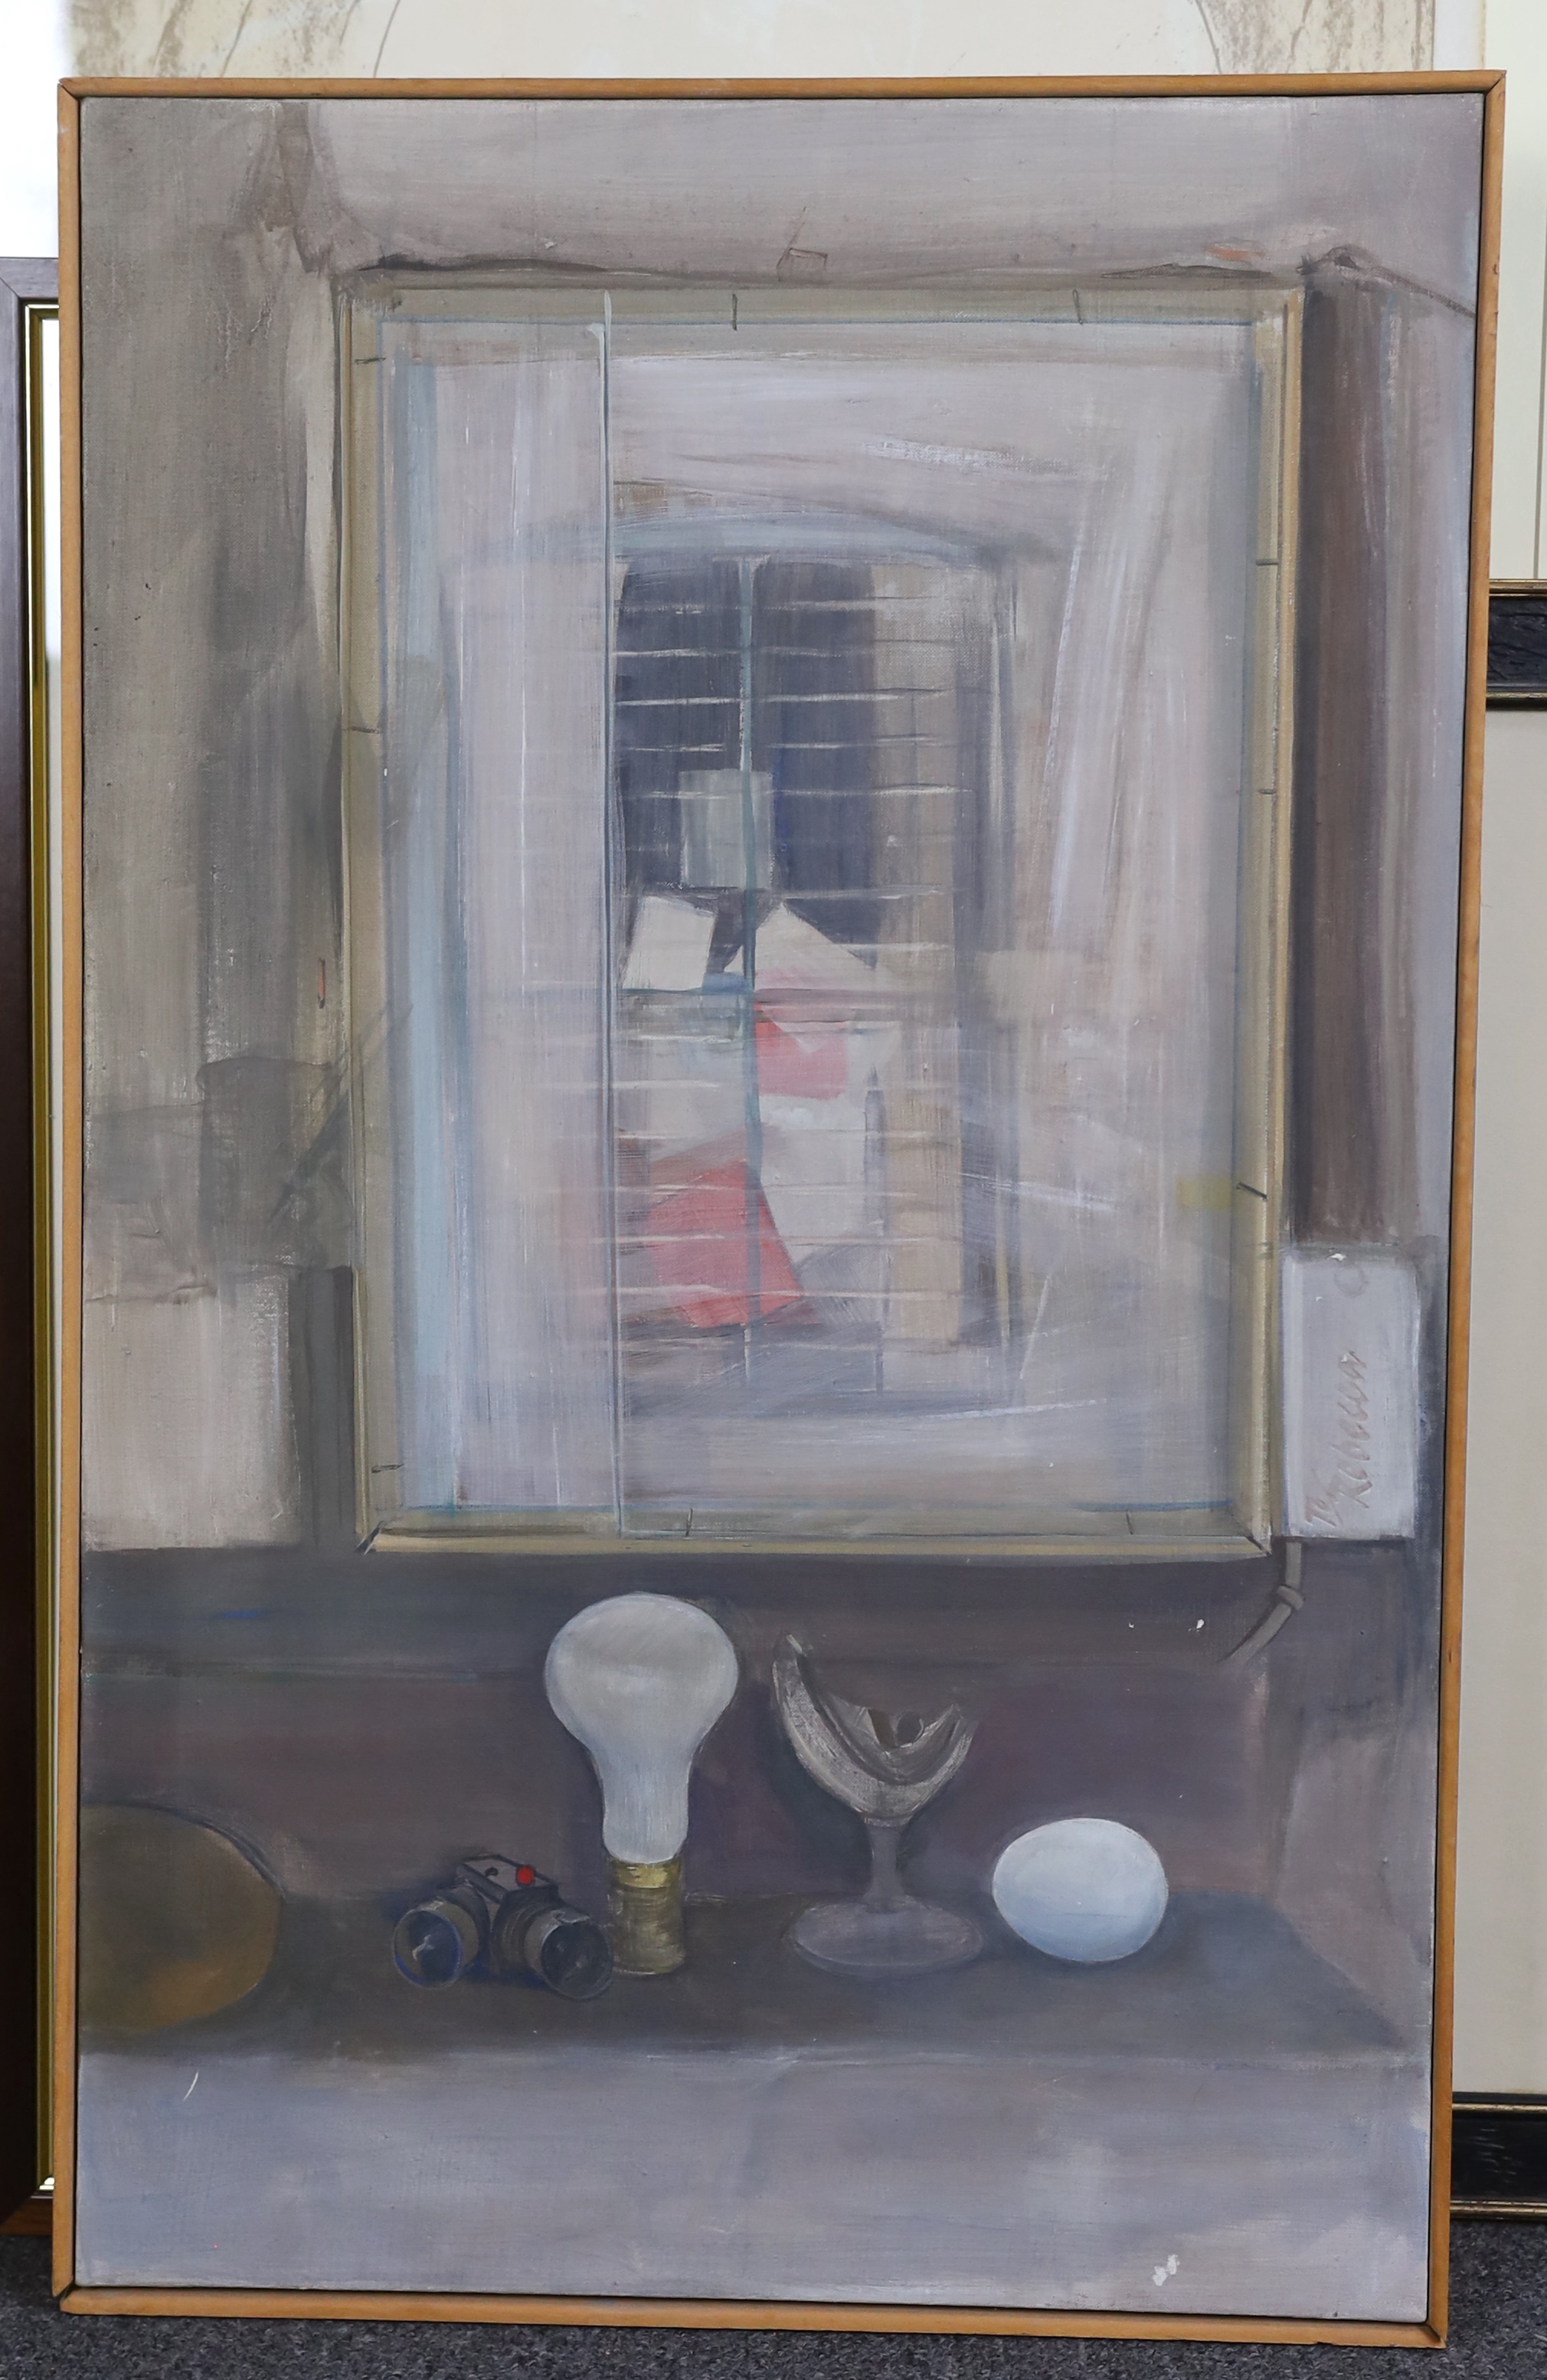 David Tindle R.A. (British, b.1932), Objects before a window, oil on canvas, 74 x 46cm